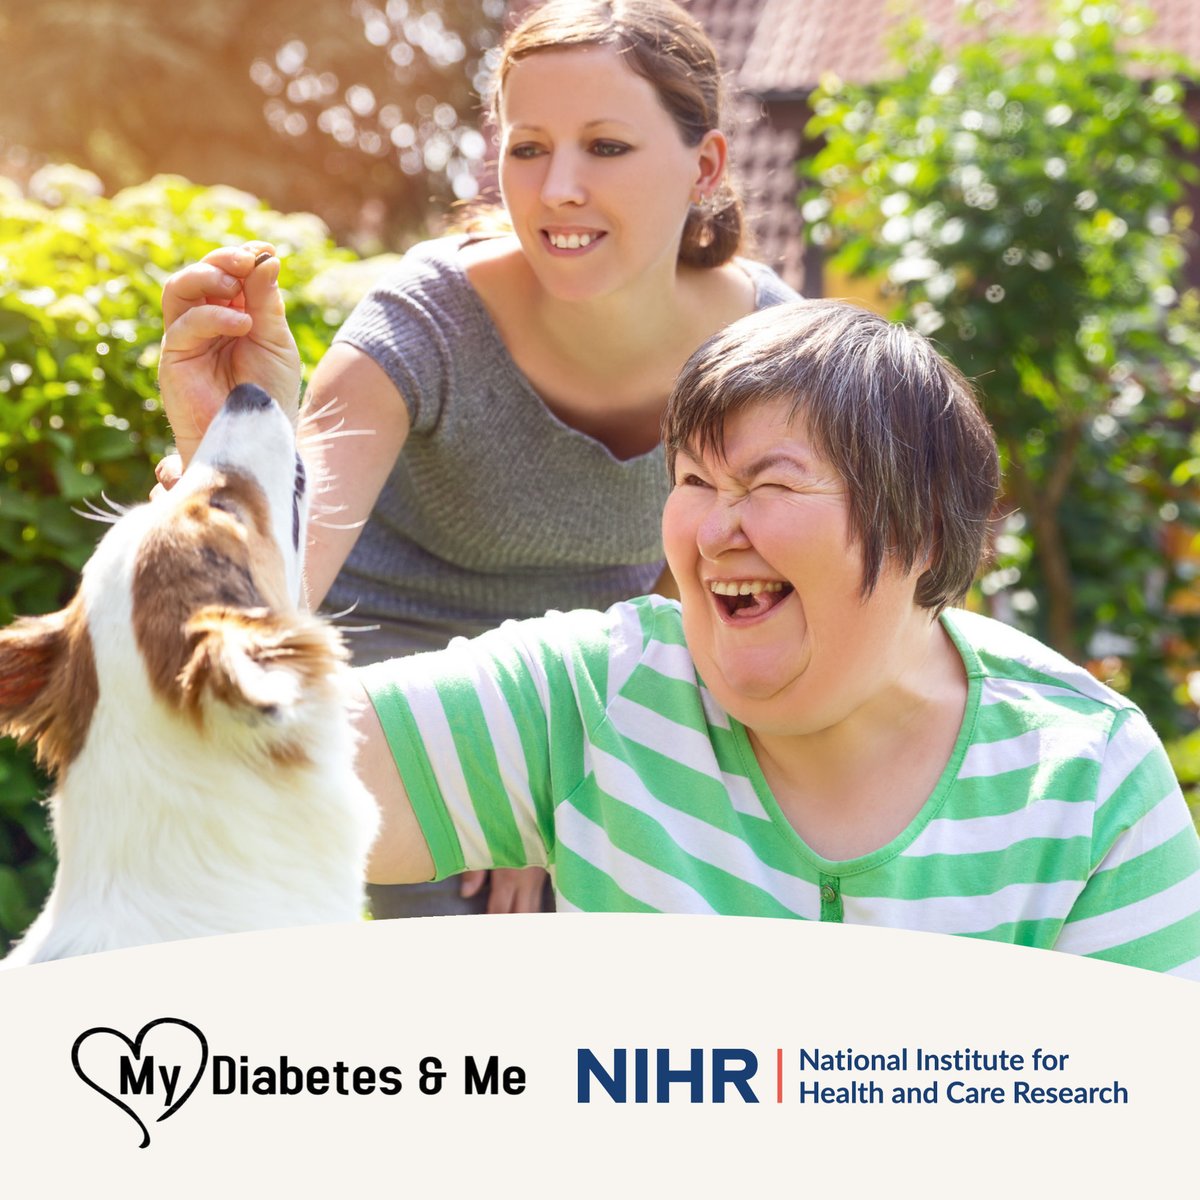 If you know someone who has a learning disability and is living with type 2 diabetes, they may be eligible for a new research study looking at diabetes management. Find out more today: healthresearch.study/participate/my…